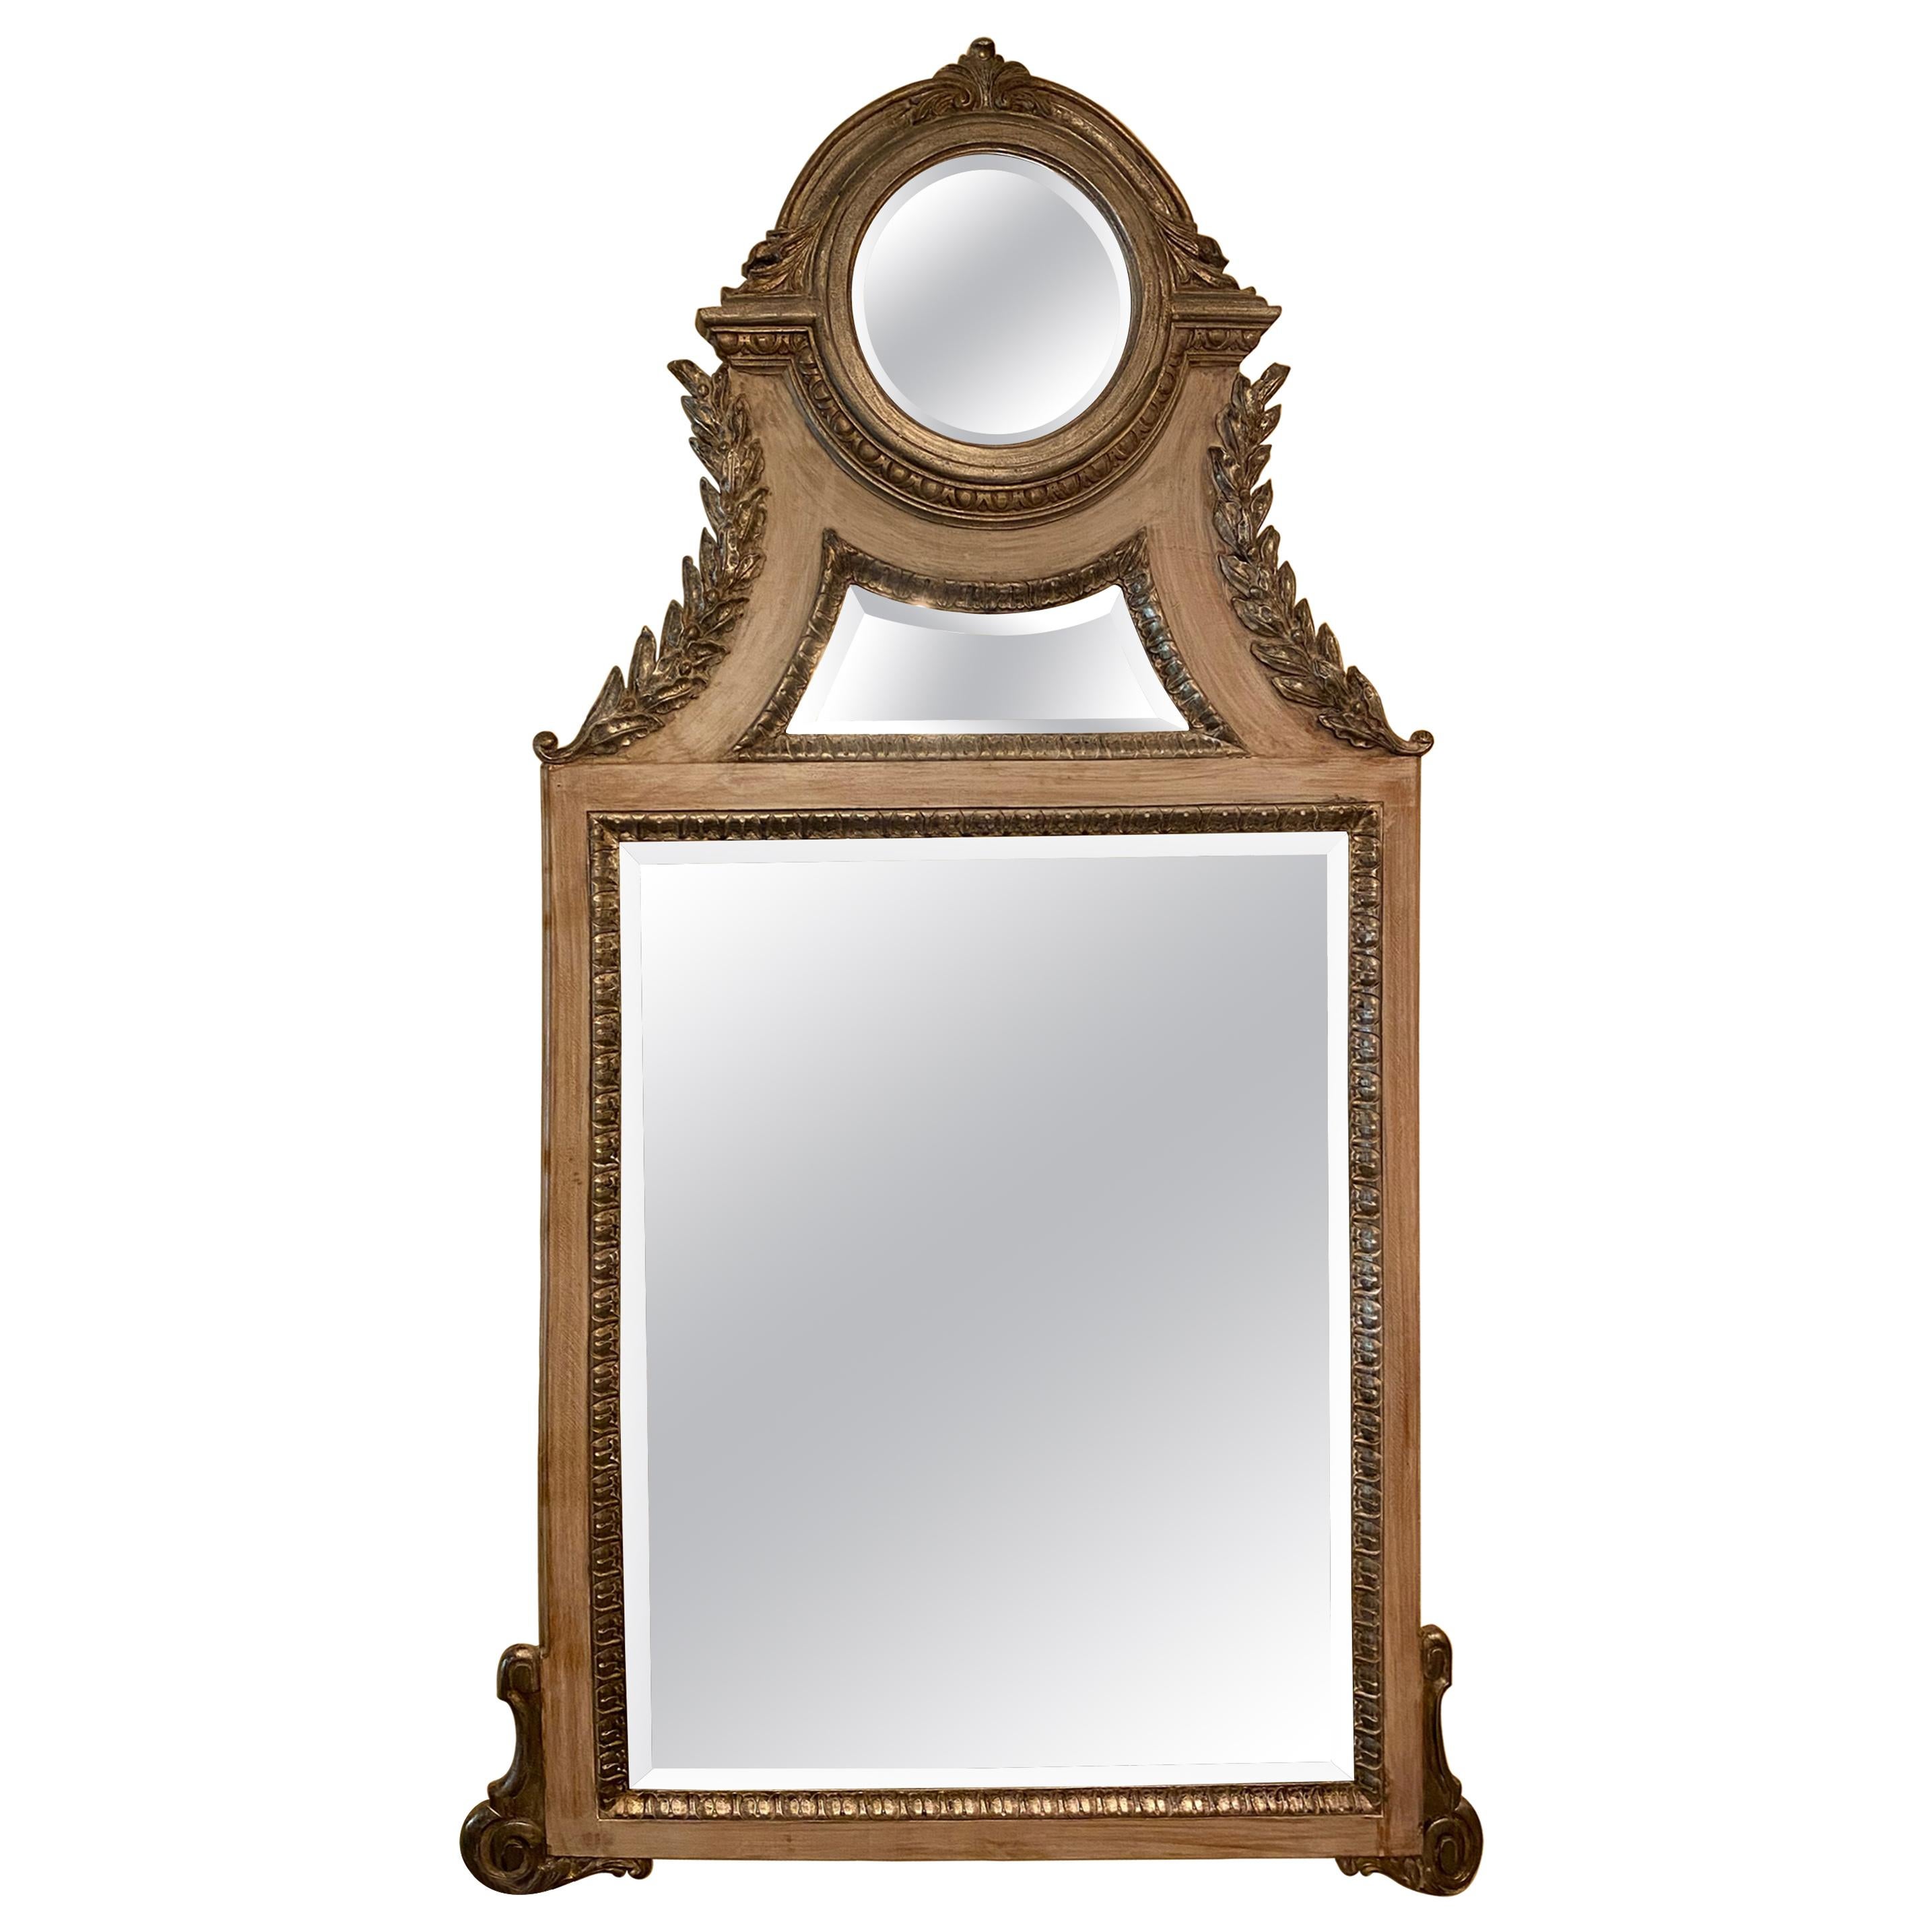 Mirror with Architectural Elements and Bevel Glass